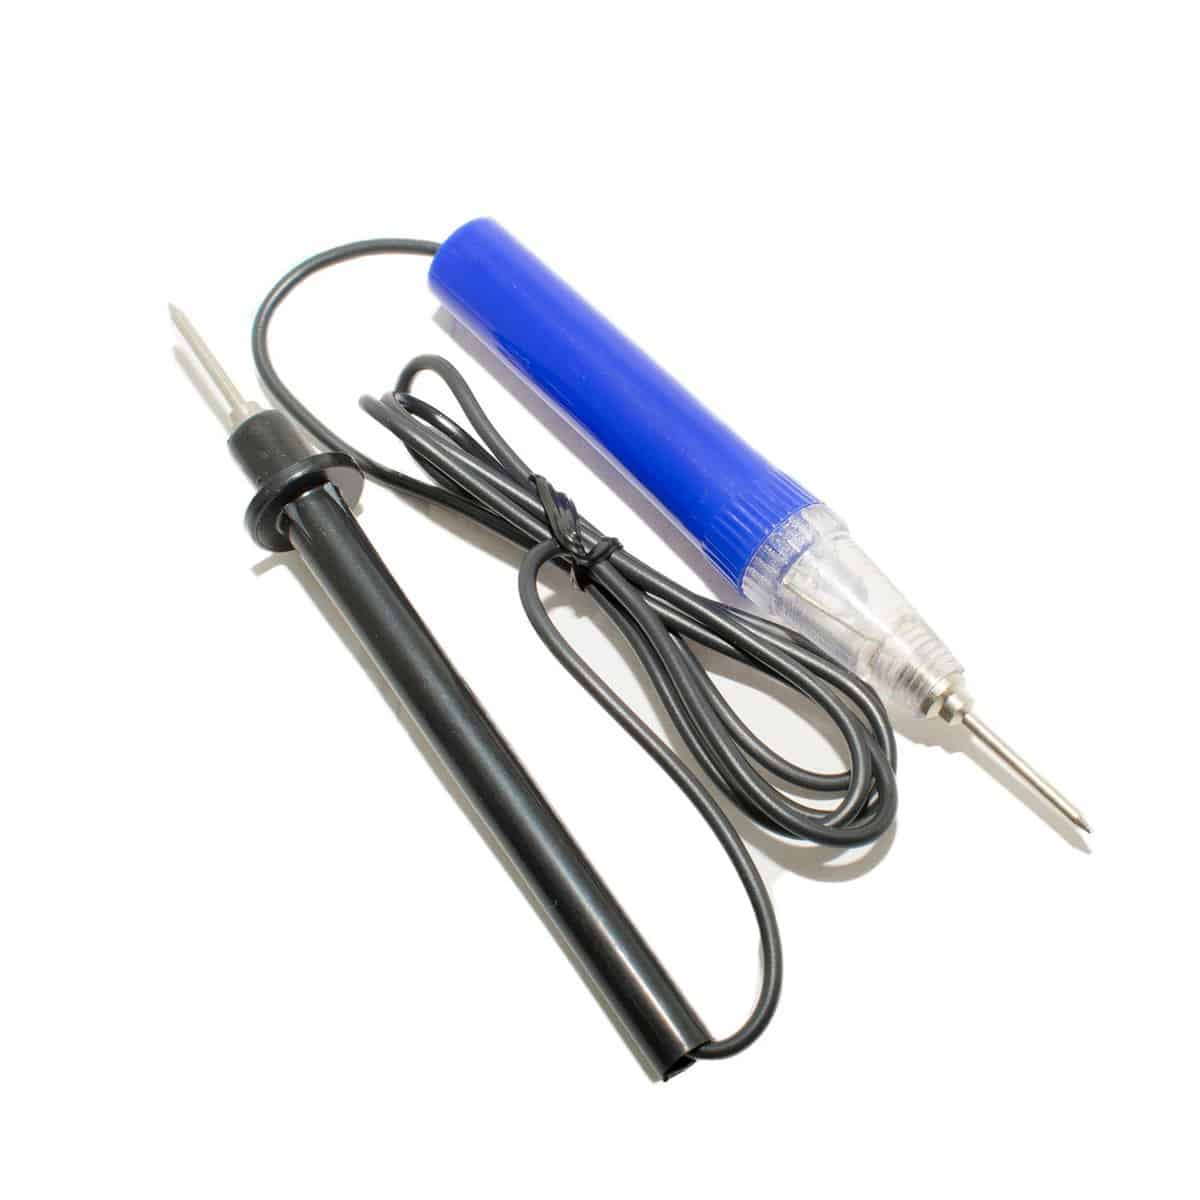 Blue color continuity tester checker for electronics